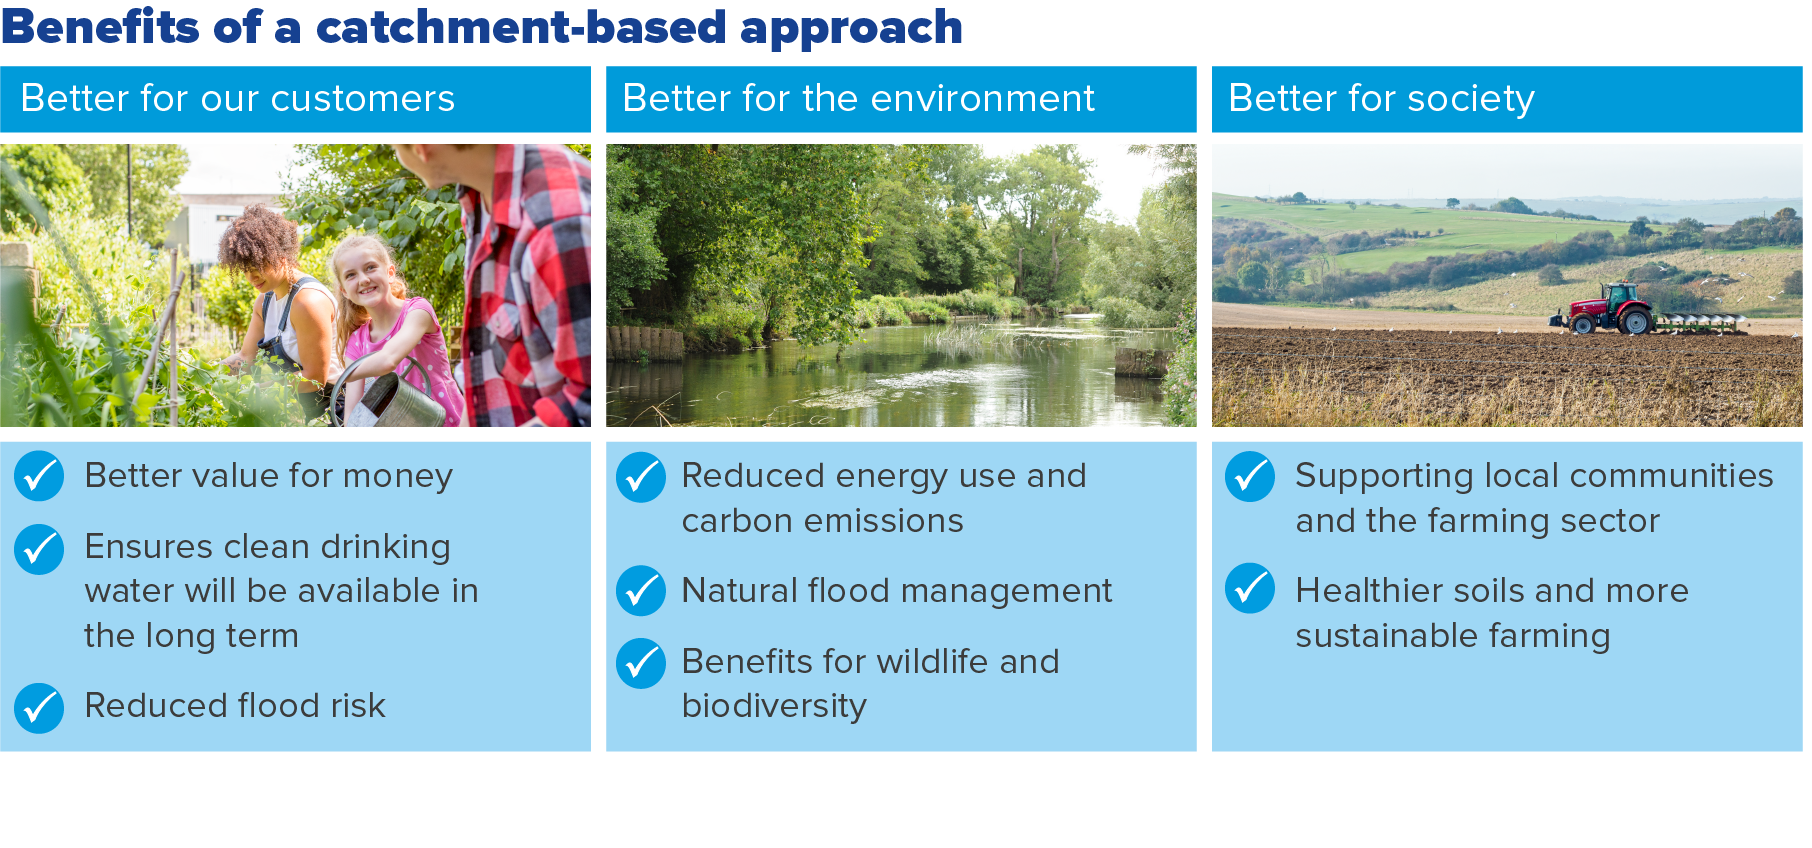 Benefits of a catchment-based approach